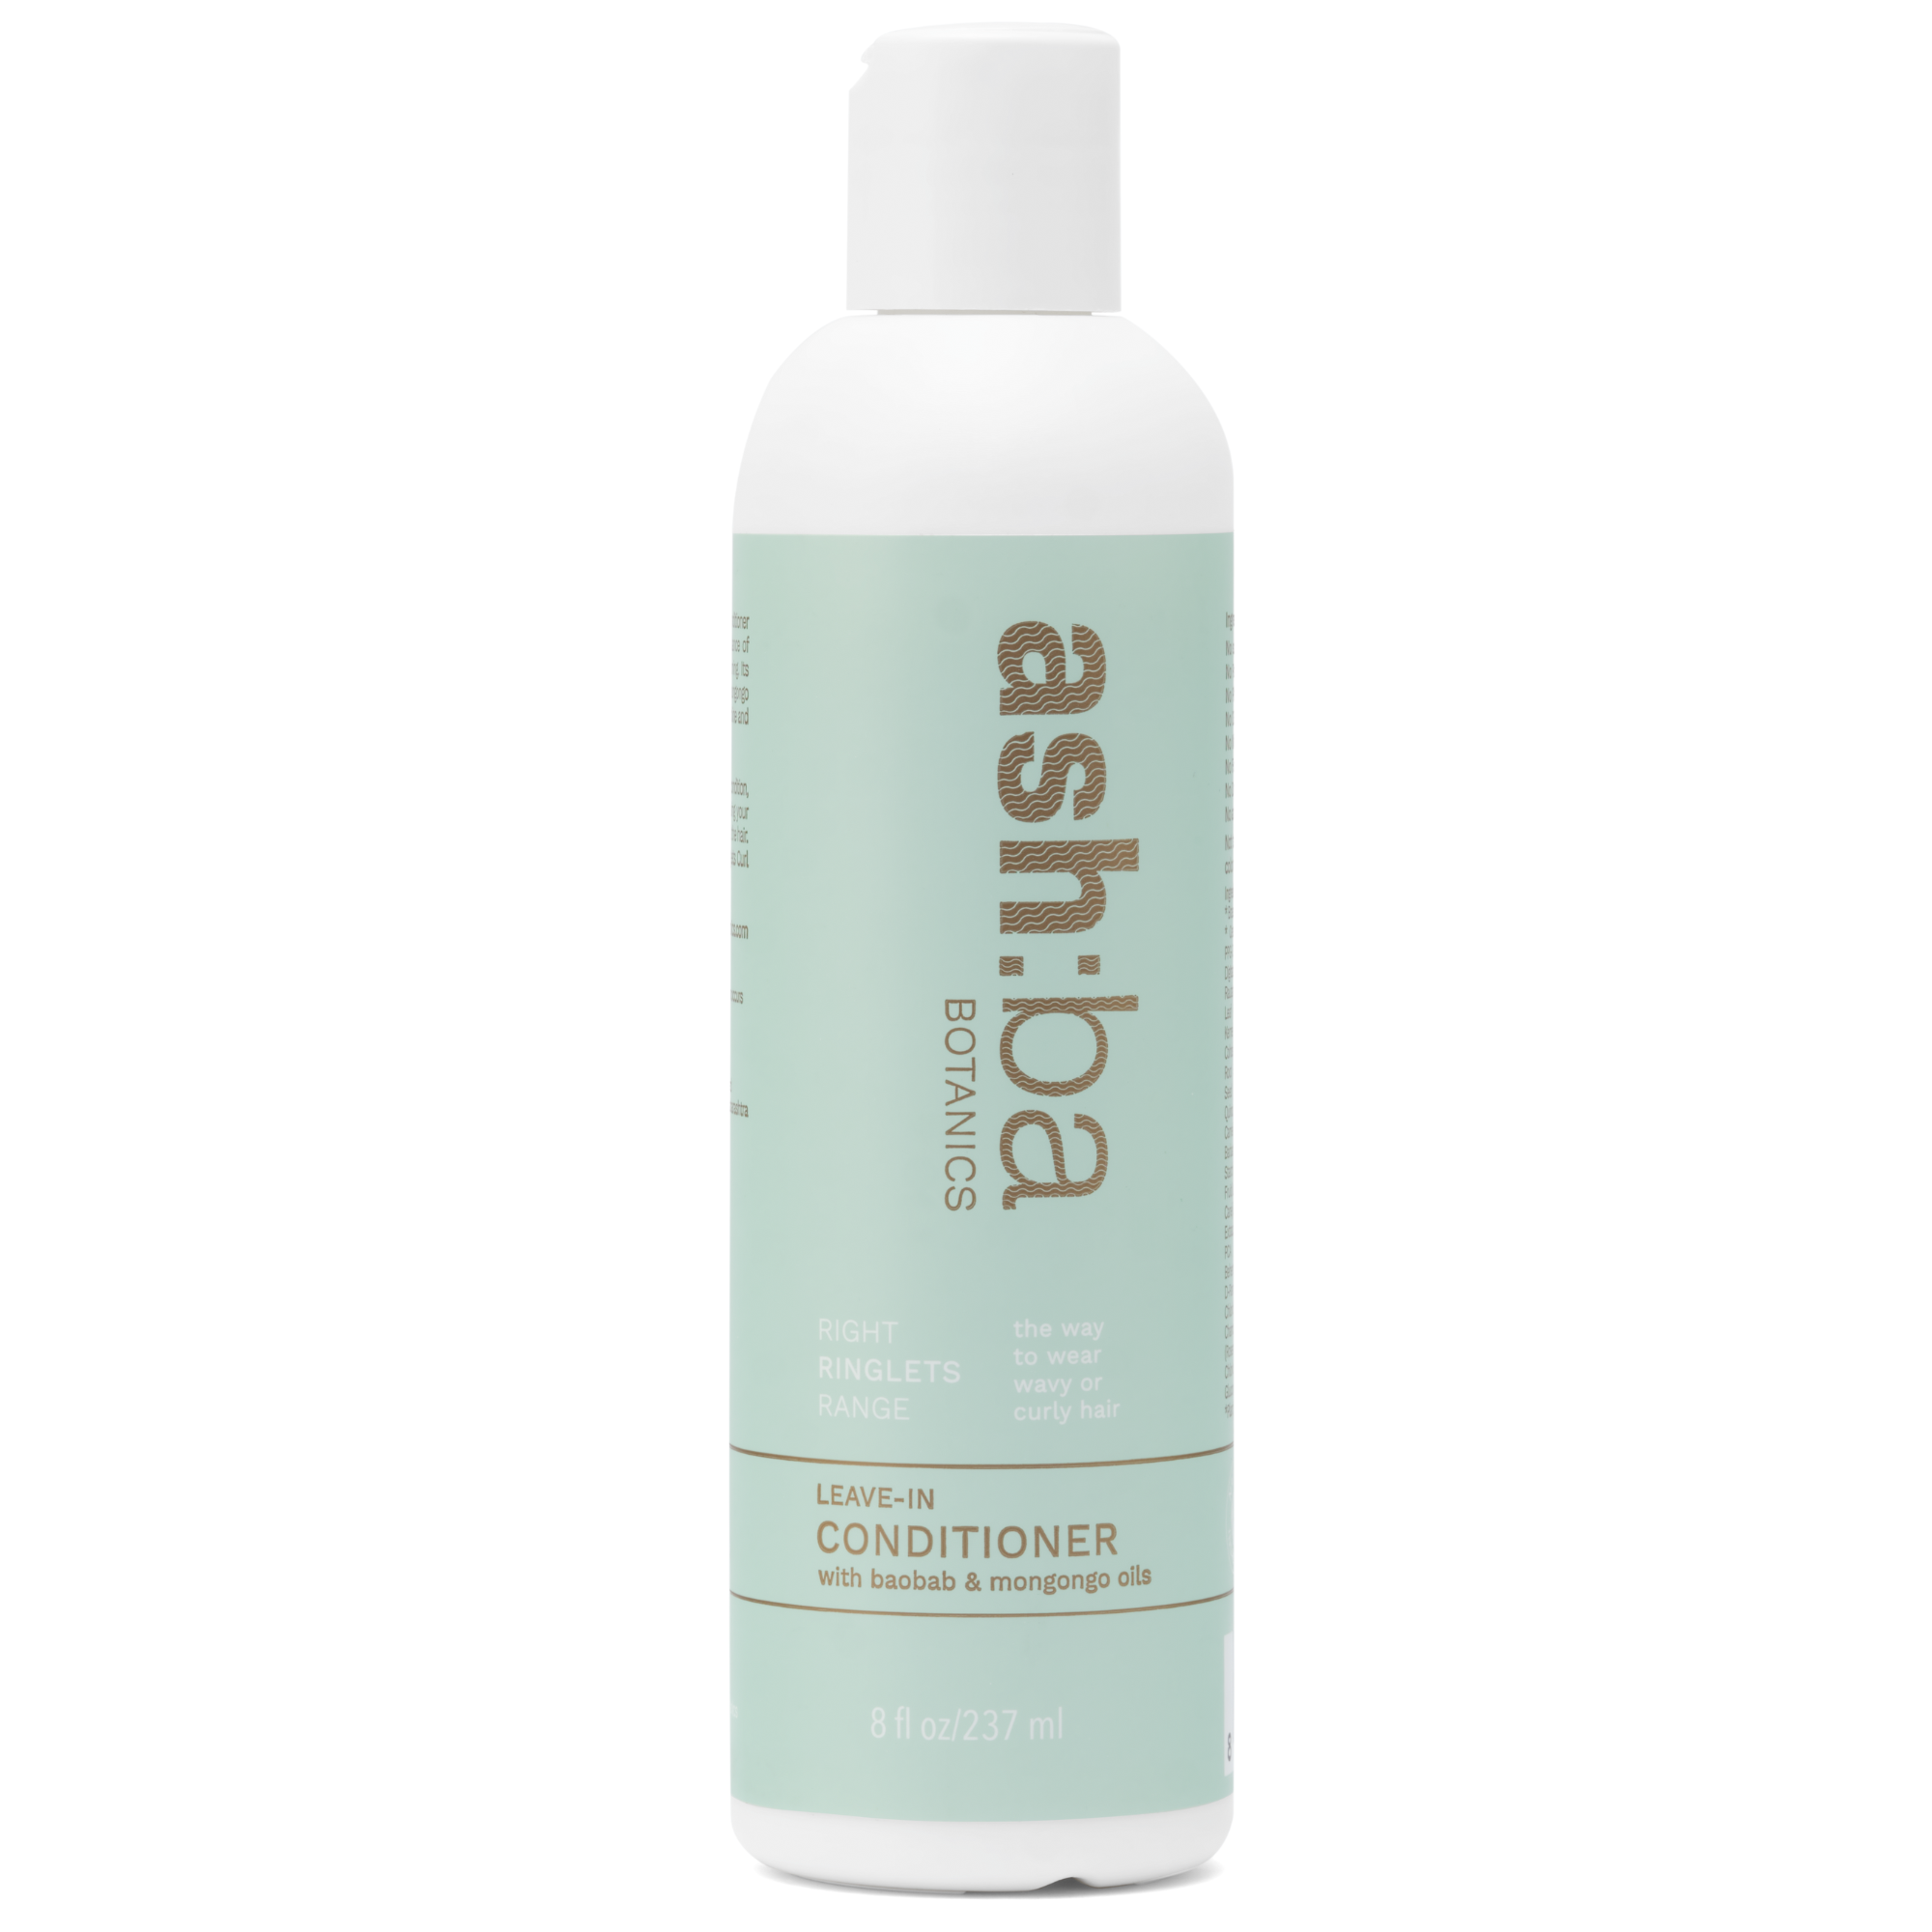 Best leave-in conditioner for curly hair